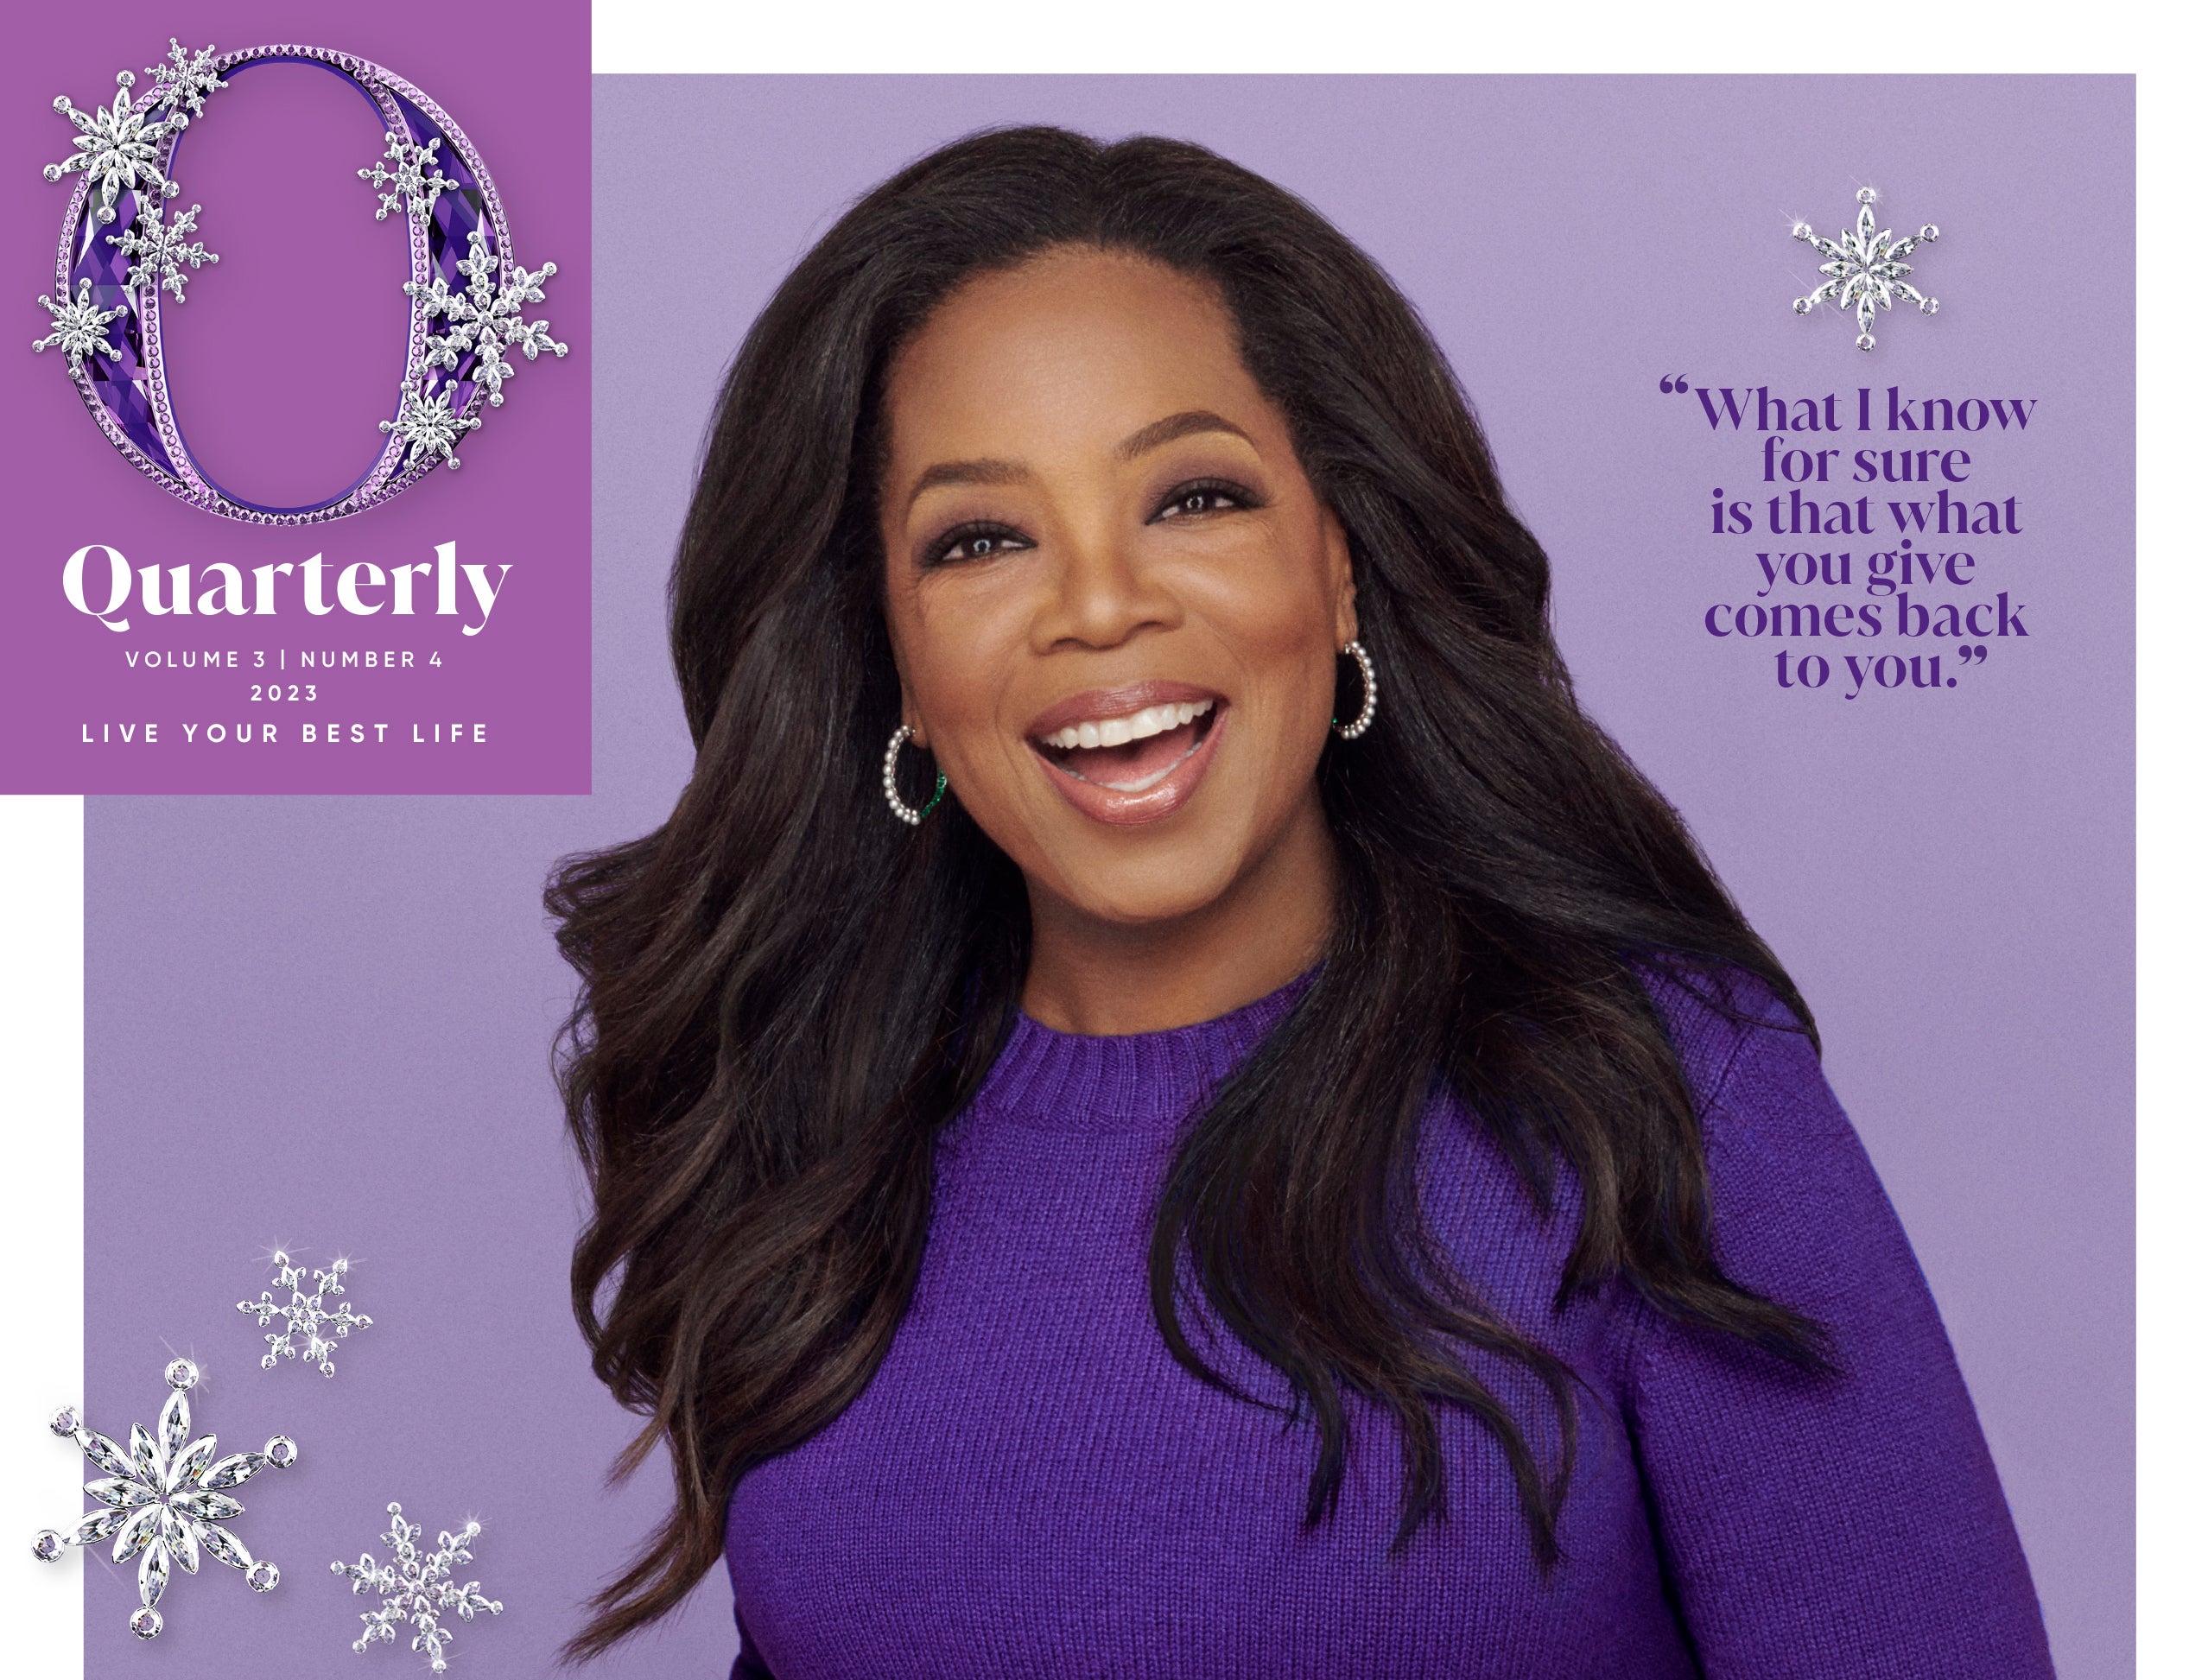 Oprah's Favorite Things: 5 picks under $100 (and 3 that cost a bit